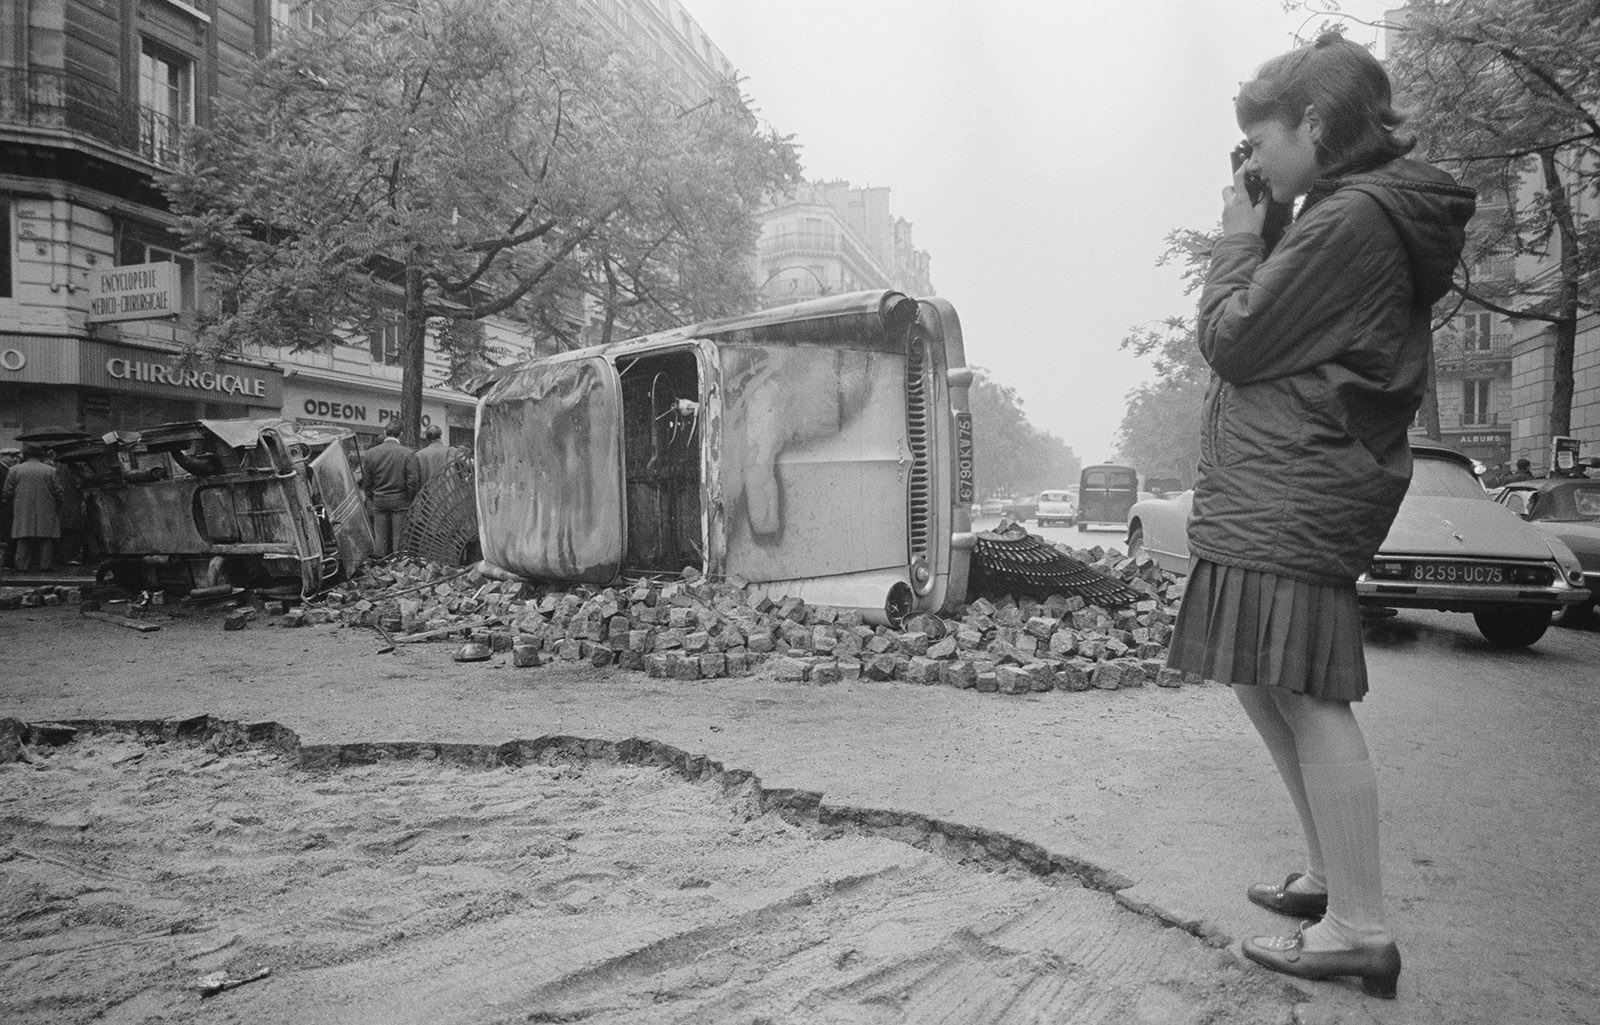 A young Parisian photographing the barricades still in place the morning after riots in May 1968